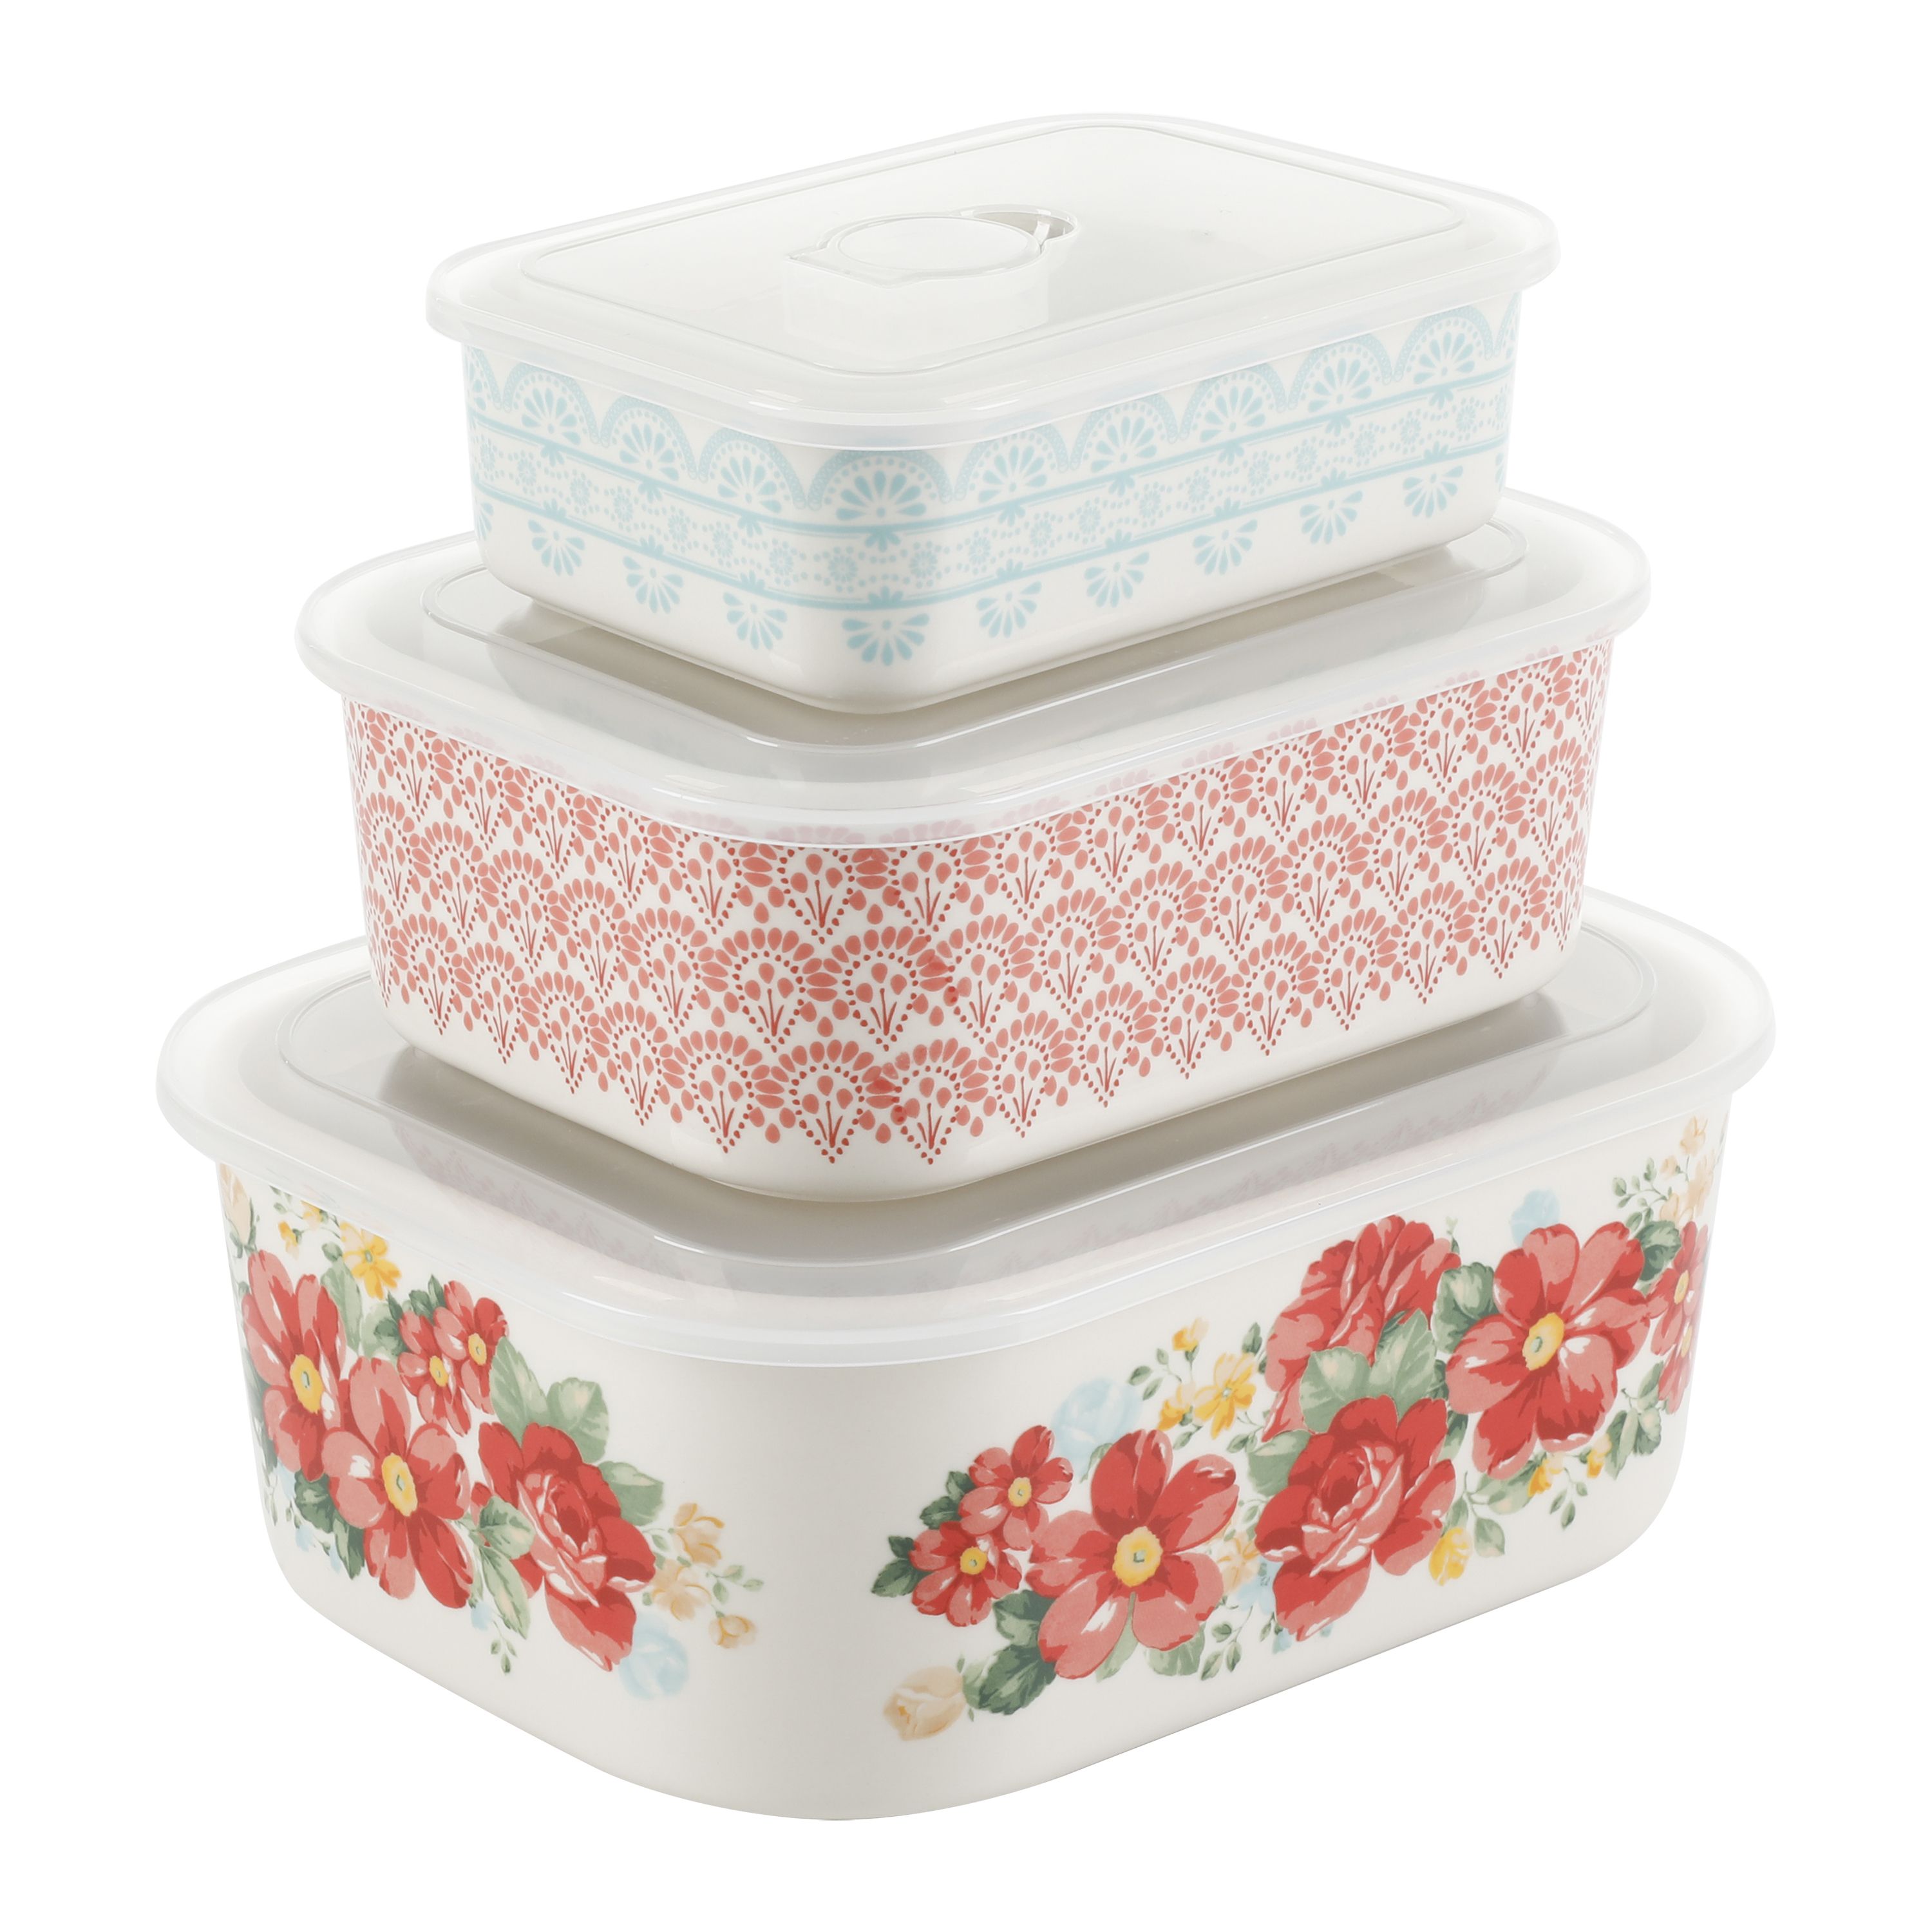 The Pioneer Woman Vintage Floral 6-Piece Decorated Stoneware Storage Set with Lids